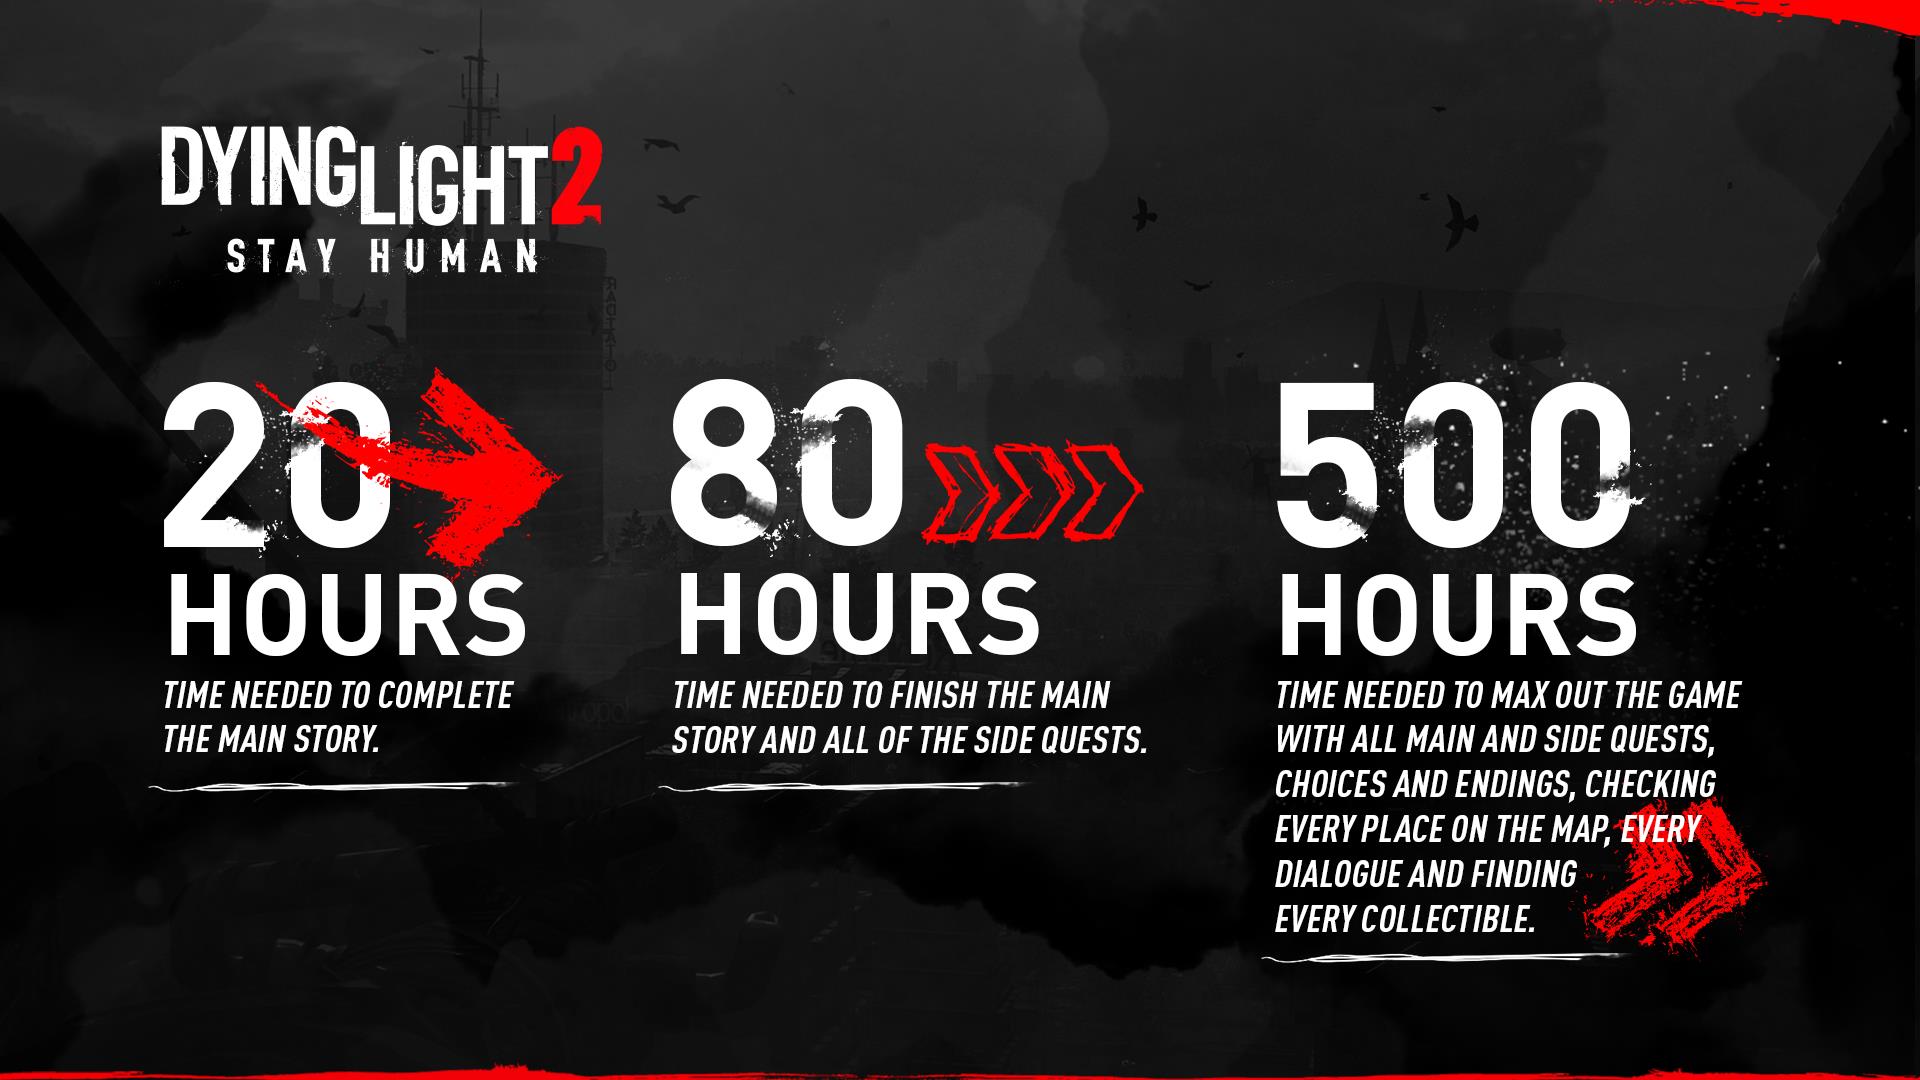 How Long Is Dying Light 2 And How Many Hours Is The Main Story?